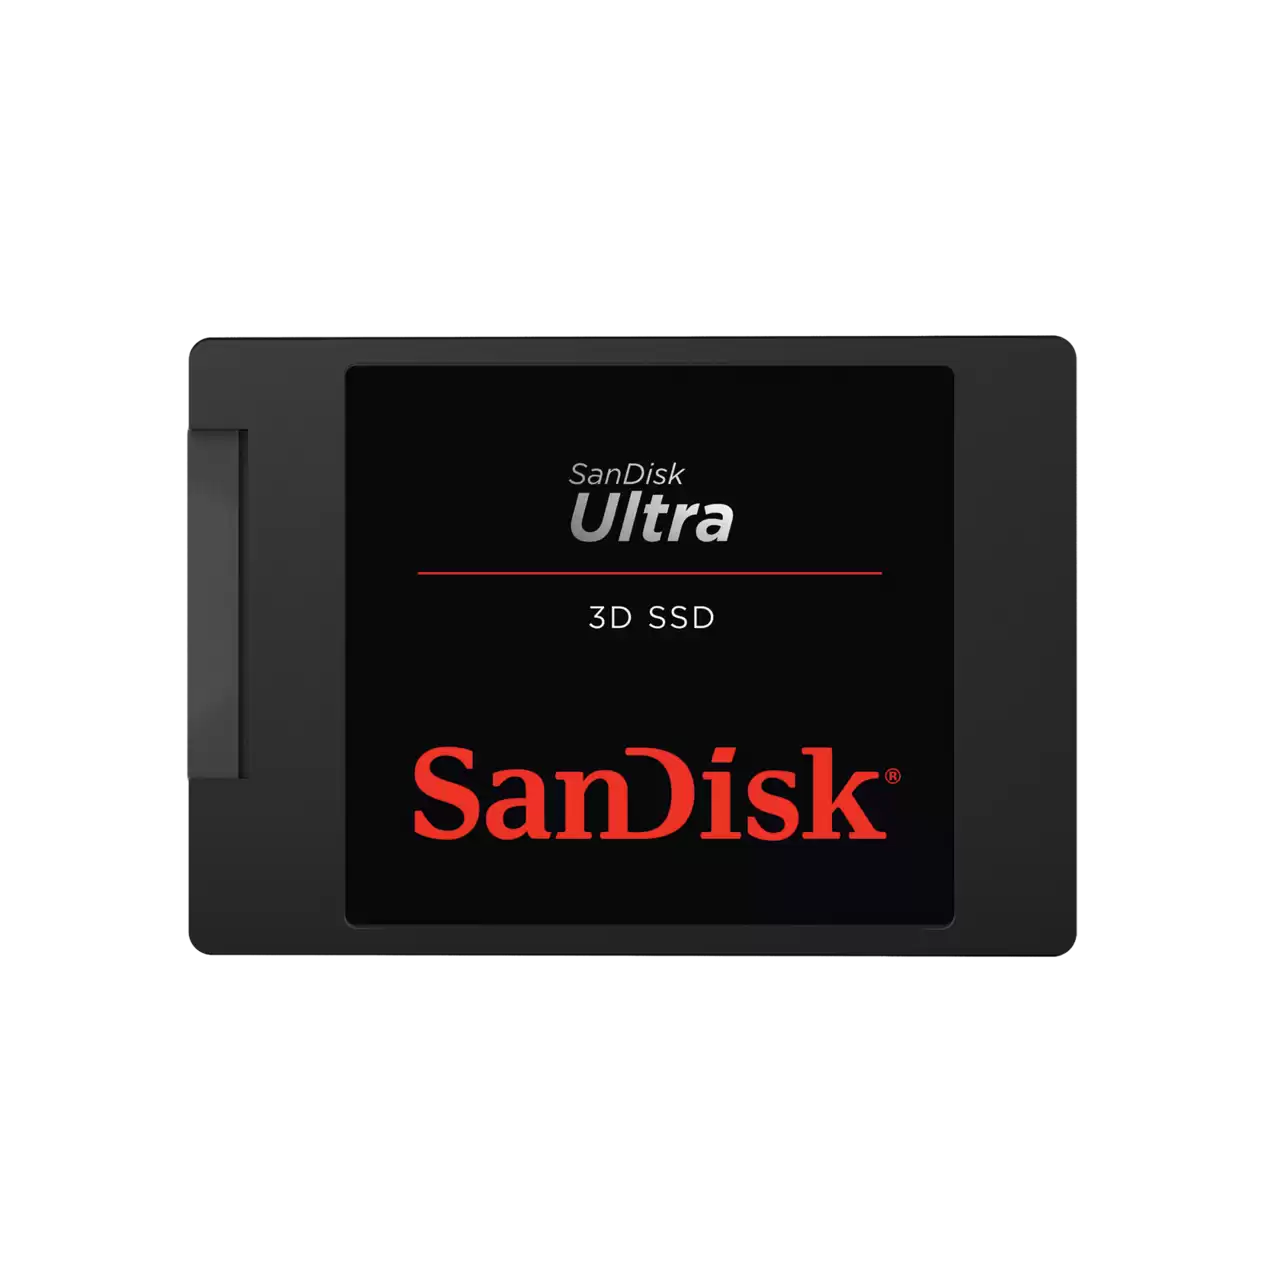 SanDisk Ultra 3D Solid State Drive